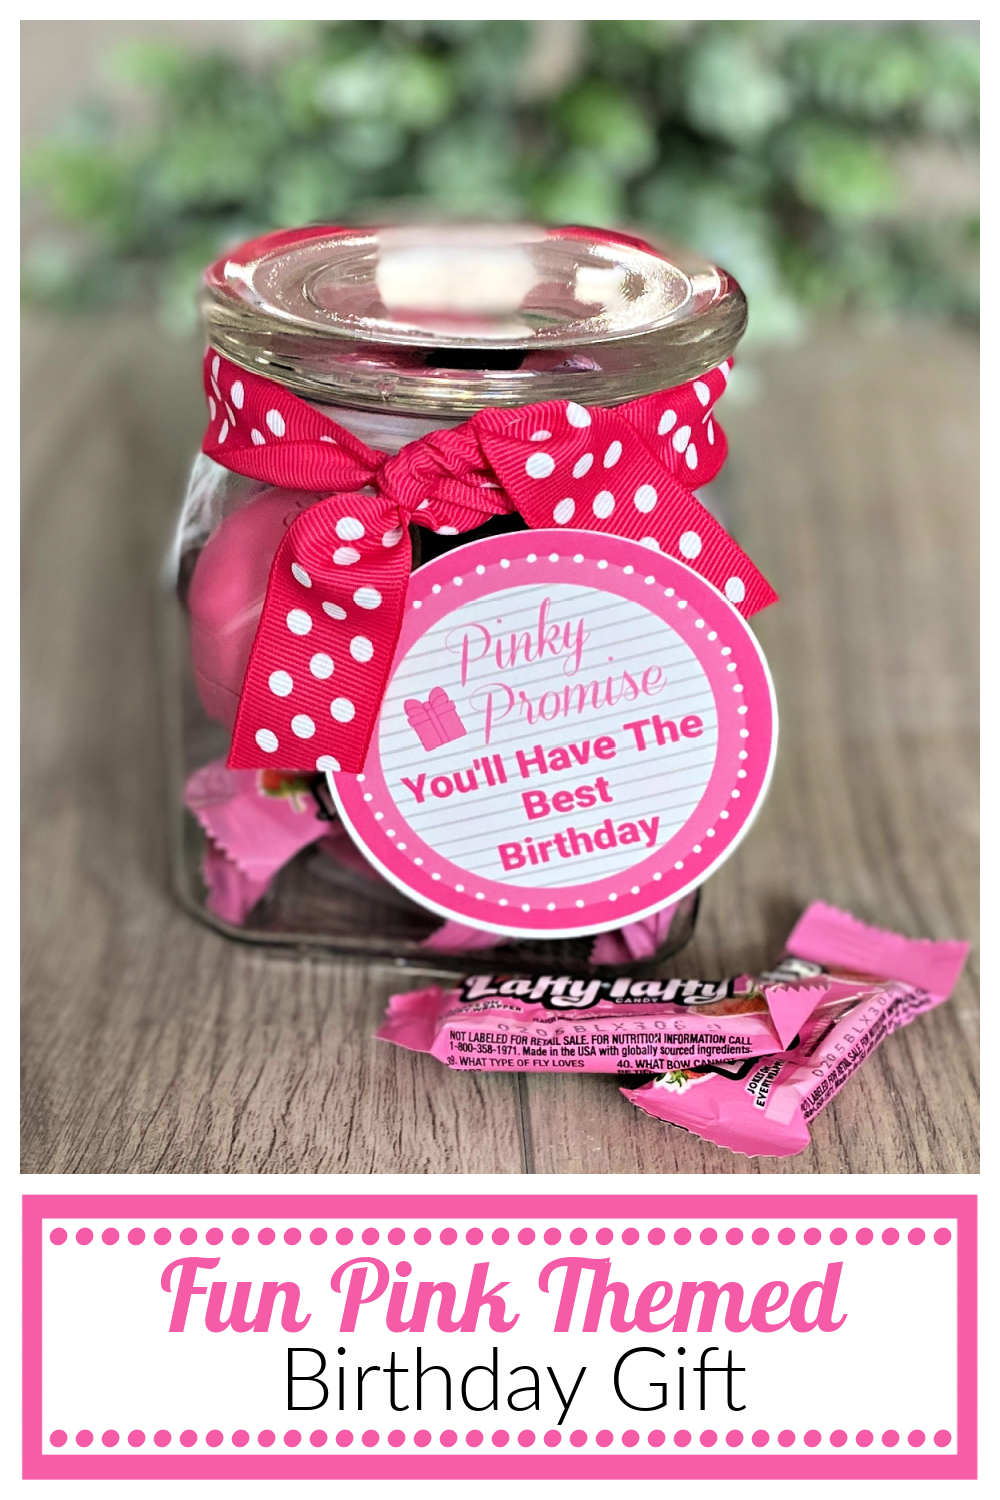 Fun and Simple Birthday Gift. This all things pink gift idea is a fun way to say happy birthday. #Pinkgiftidea #funpinkbirthdaygift